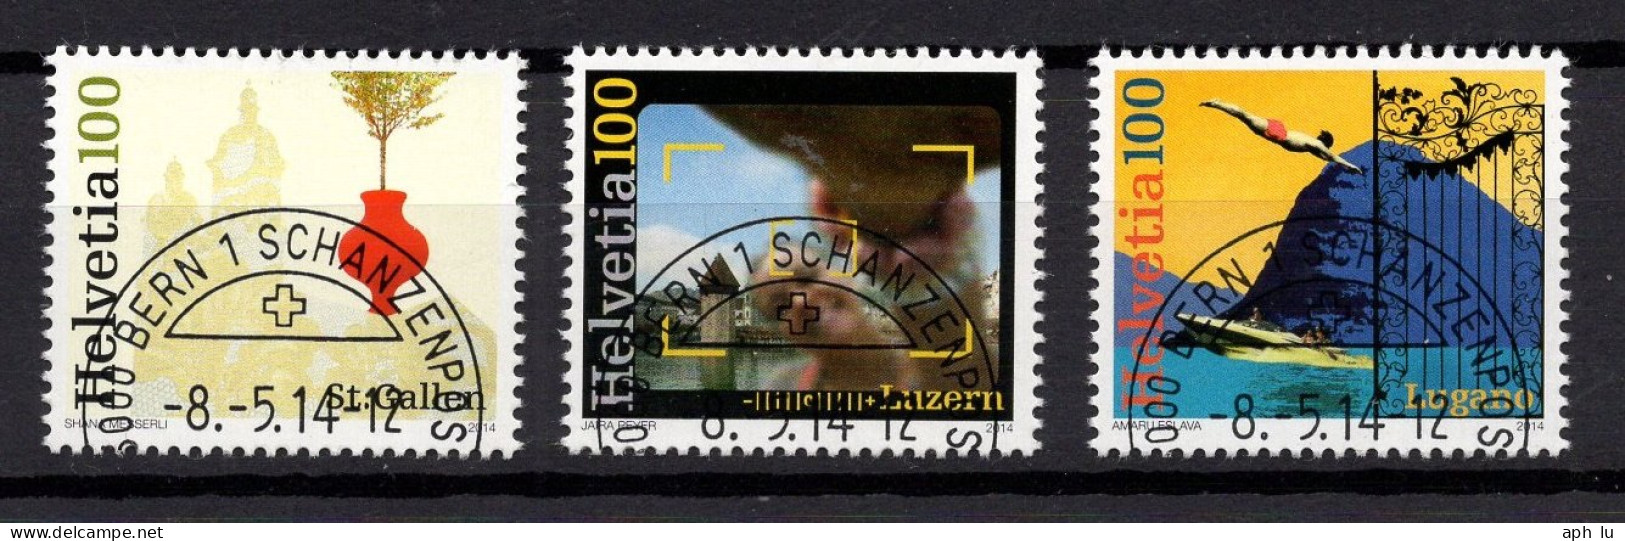 Serie 2014 Gestempelt (AD3704) - Used Stamps